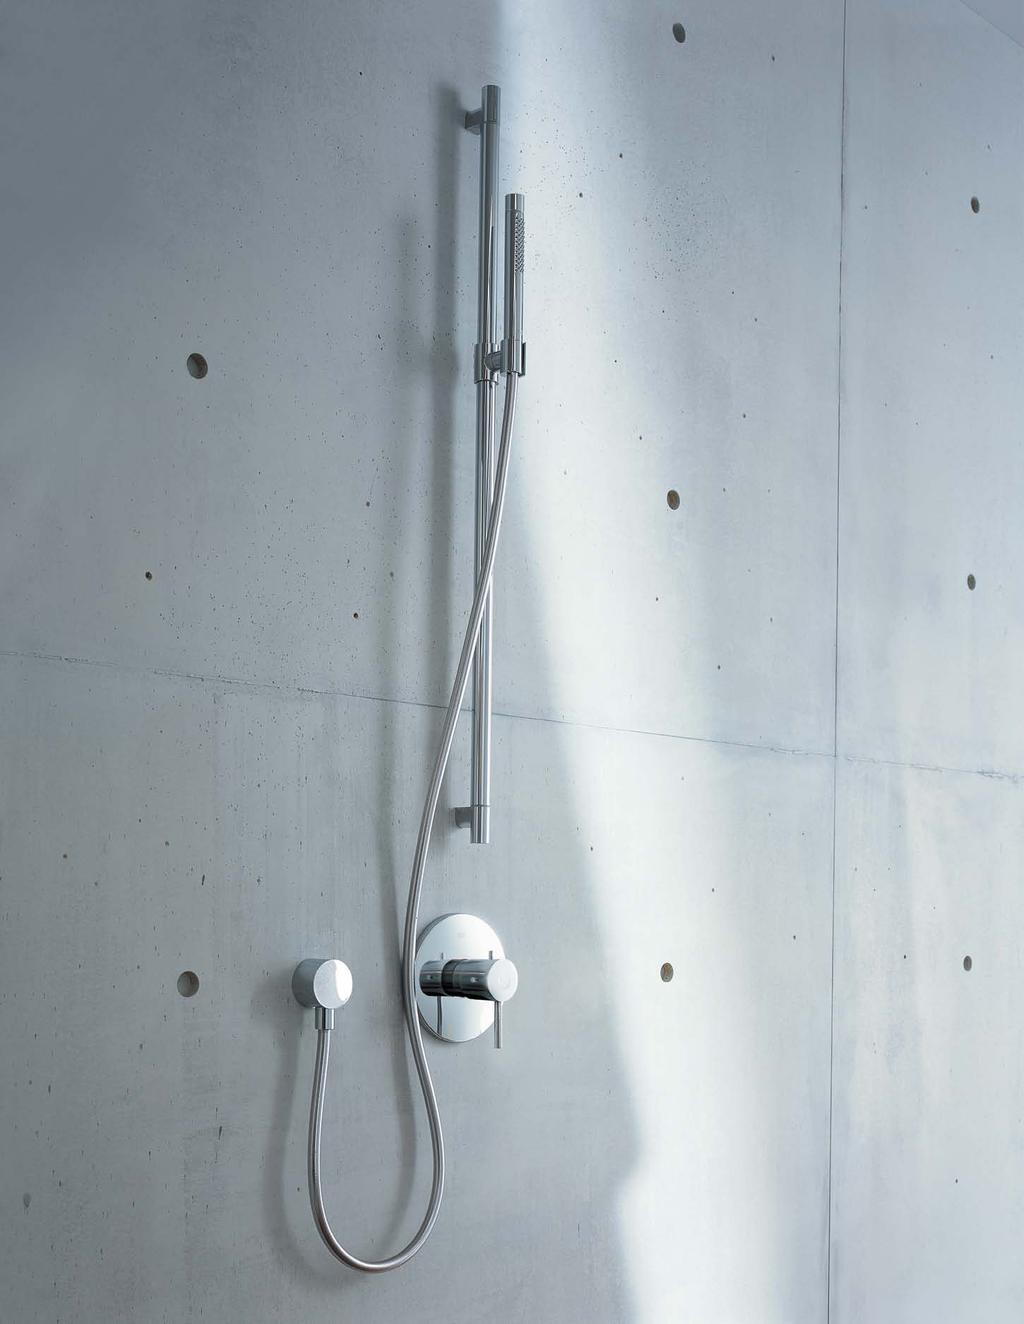 Pressure Balance. Complement the beautiful, minimalist forms of Axor Starck by taking a similar approach to design your shower configuration.